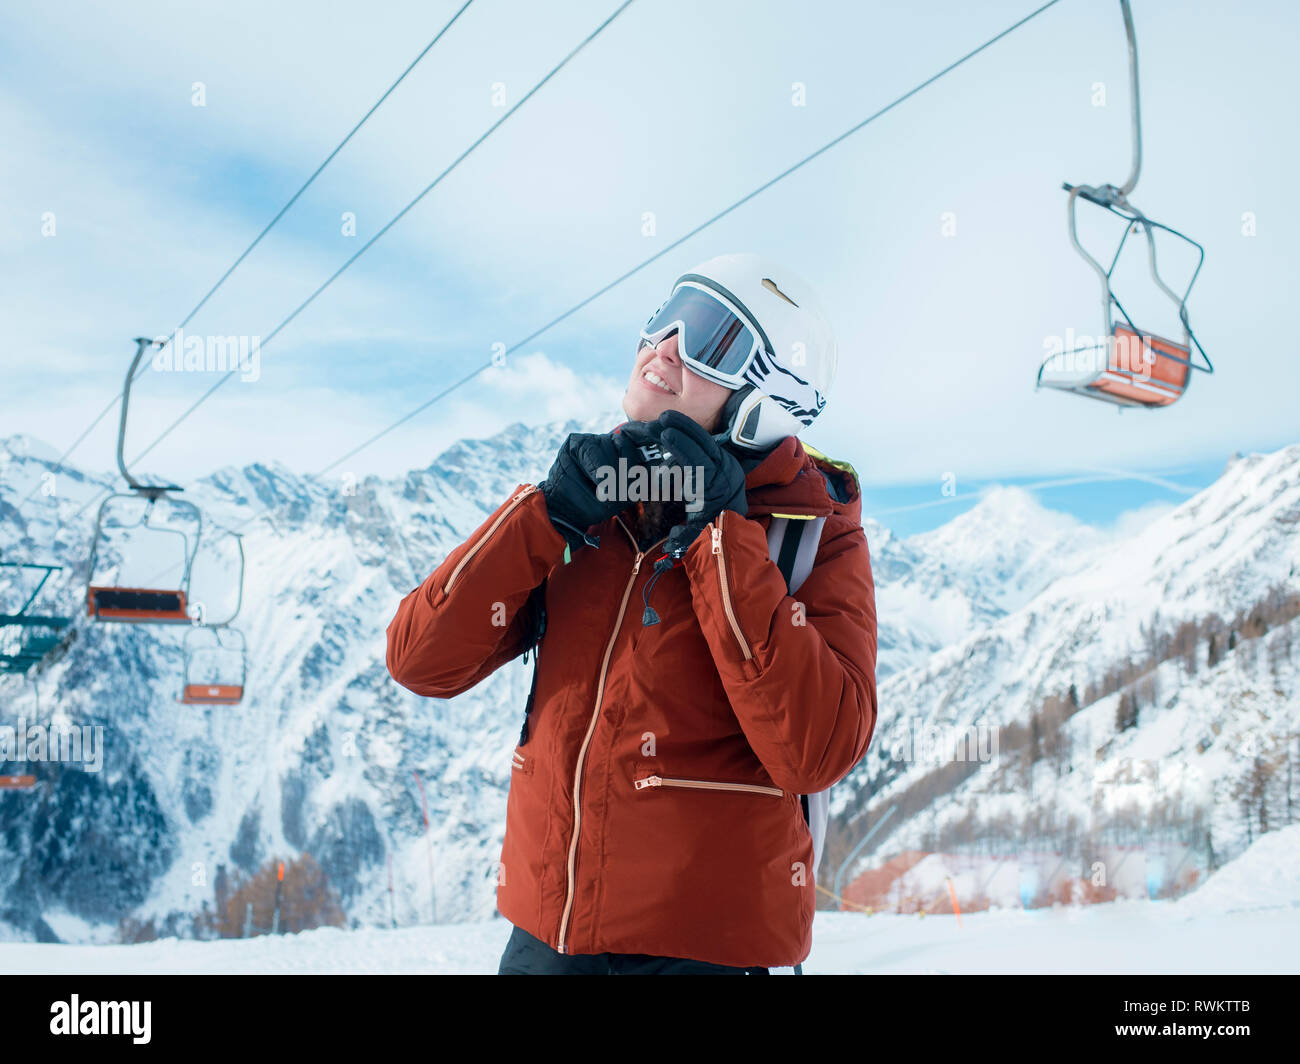 Young woman skier fastening helmet in snow covered landscape, Alpe Ciamporino, Piemonte, Italy Stock Photo